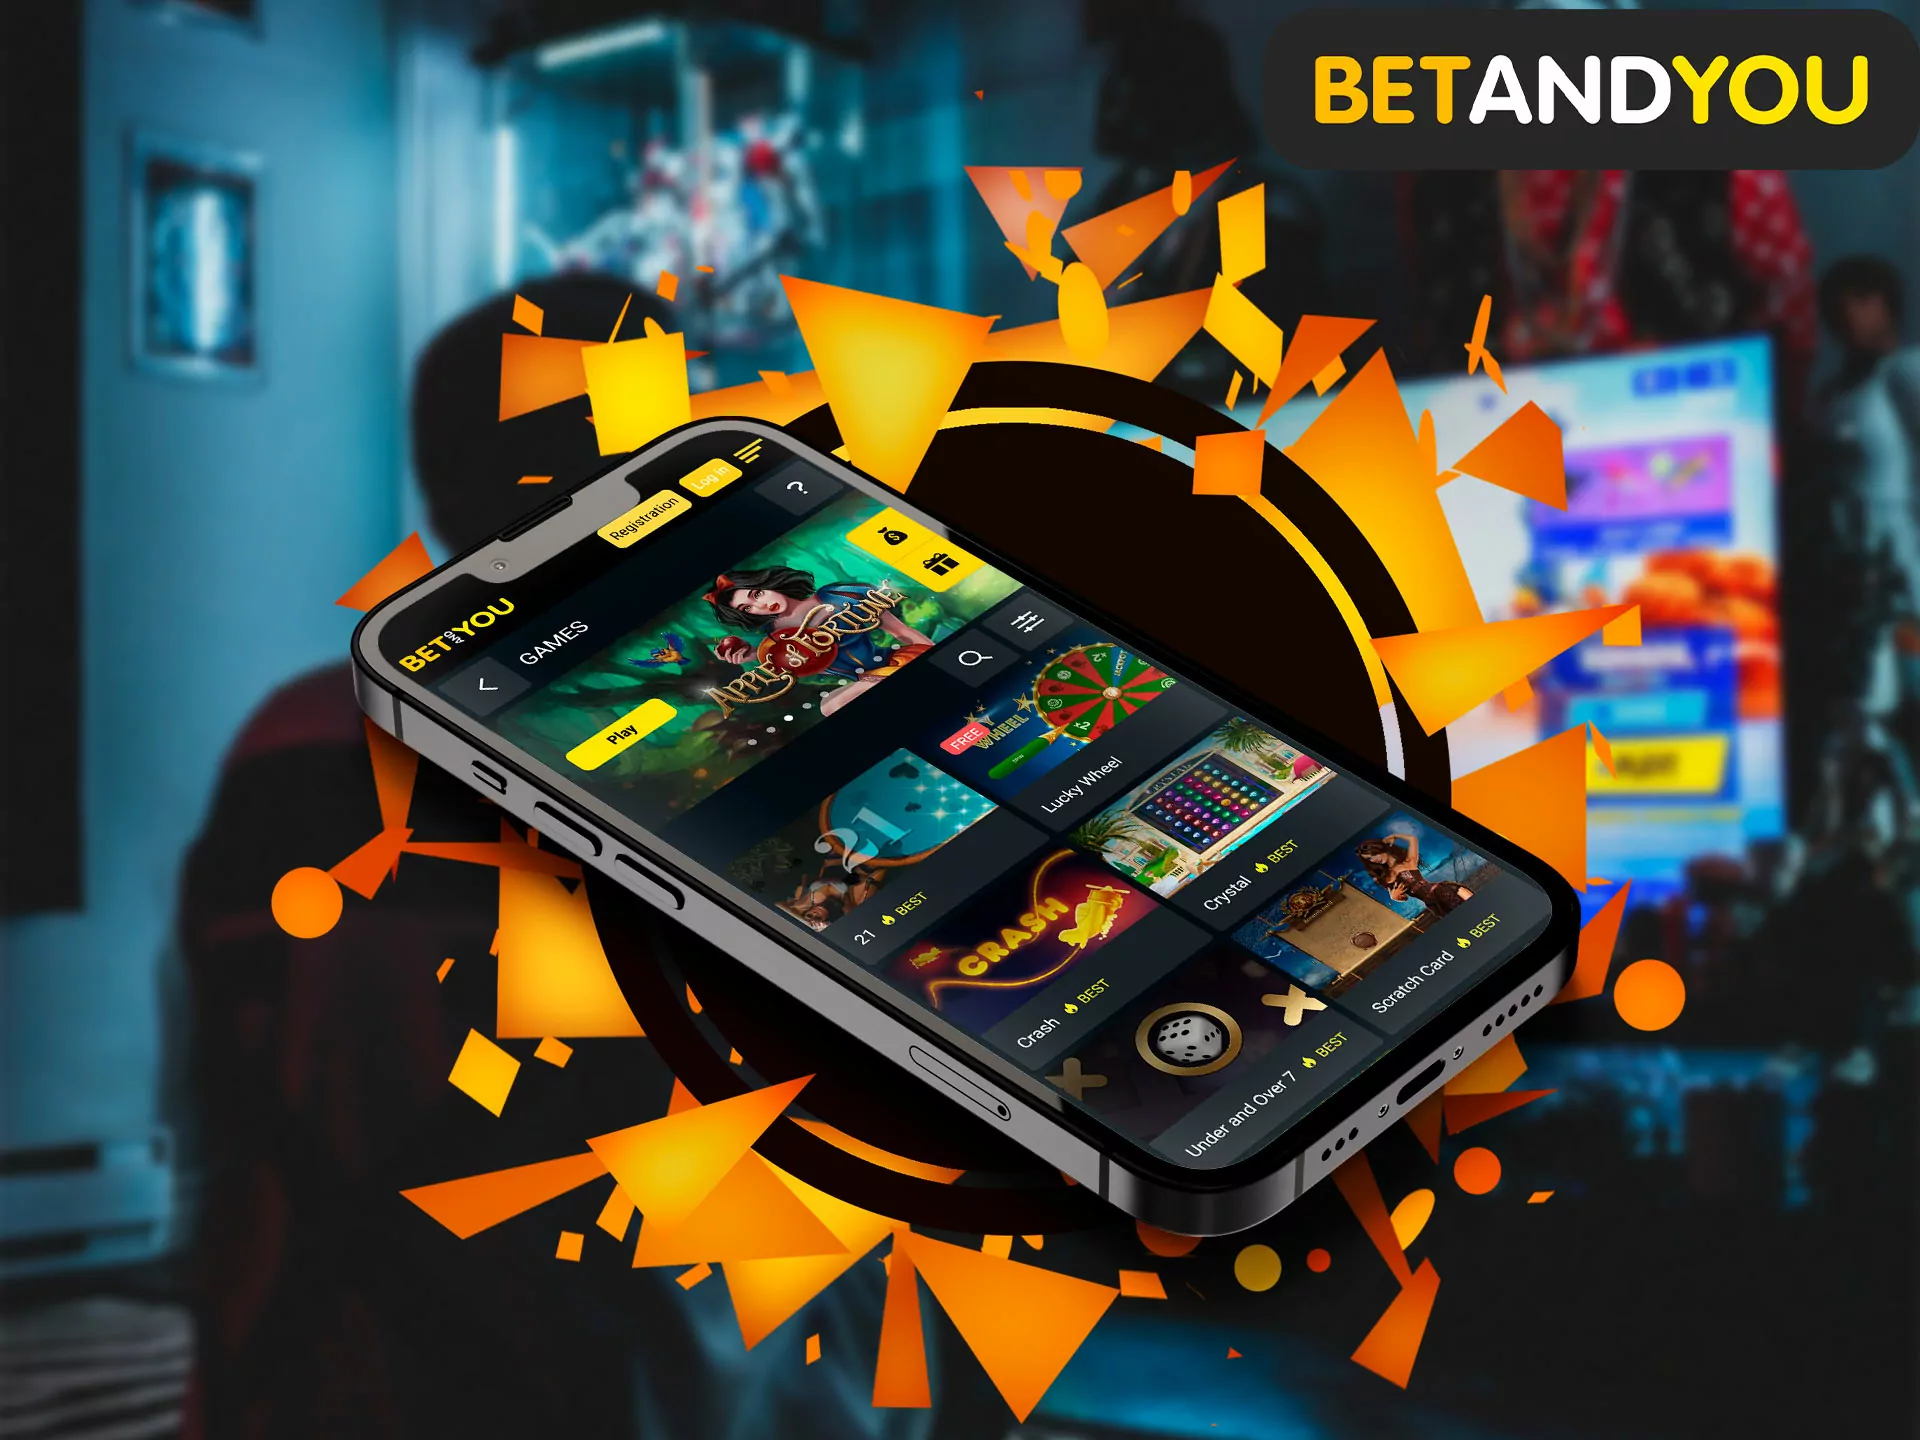 These entertainments developed by Betandyou are waiting for you: Card Games, Slots, Rise to Victory, Dice, Lotteries and Others.